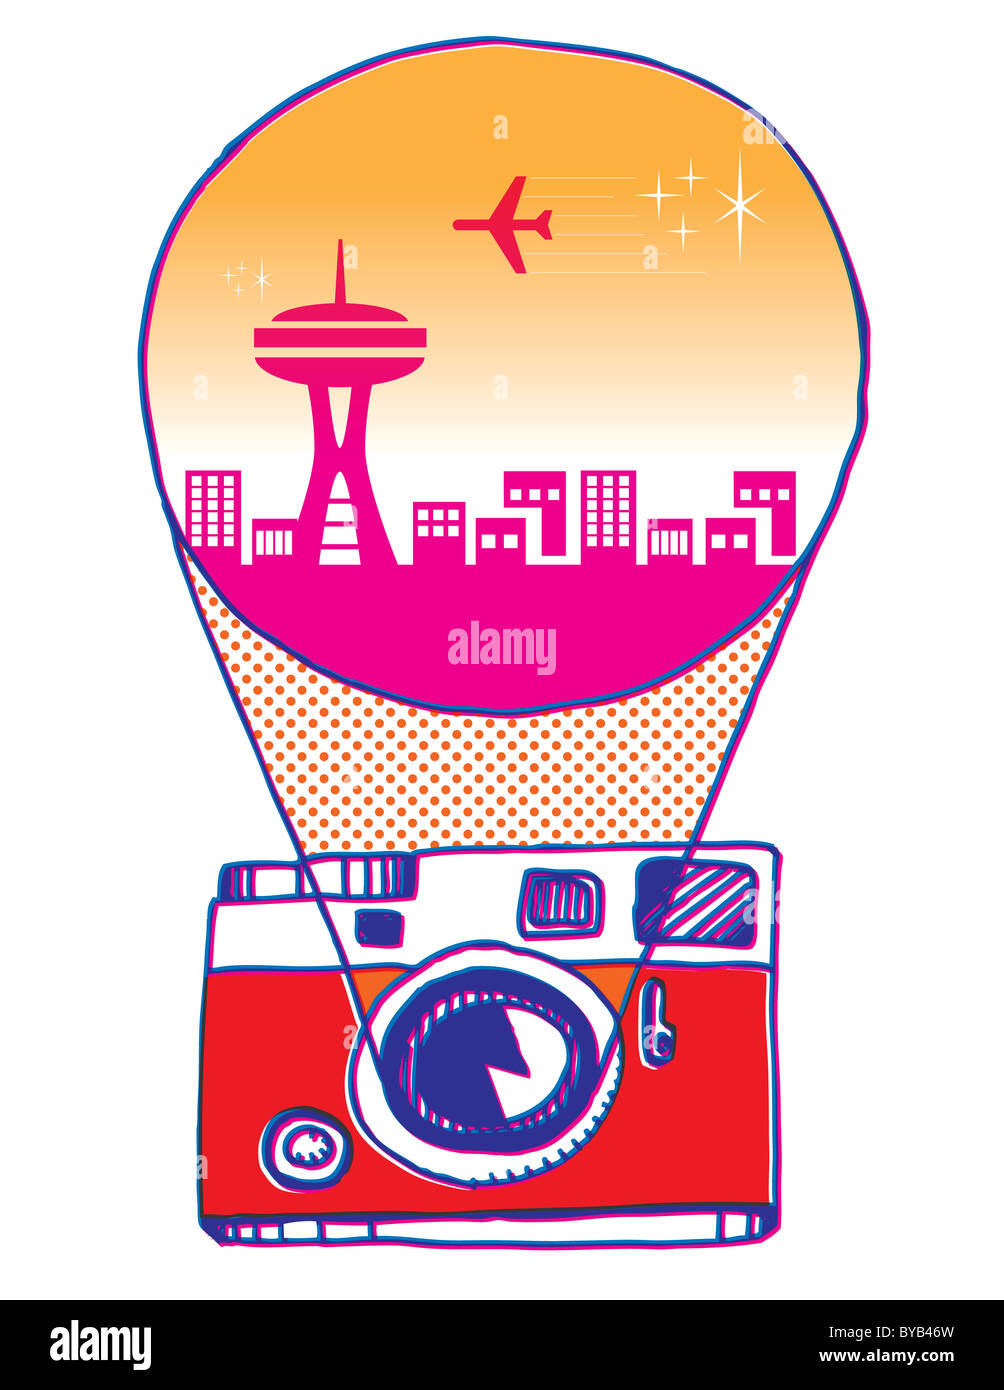 Illustration of a camera projecting a city scene Stock Photo